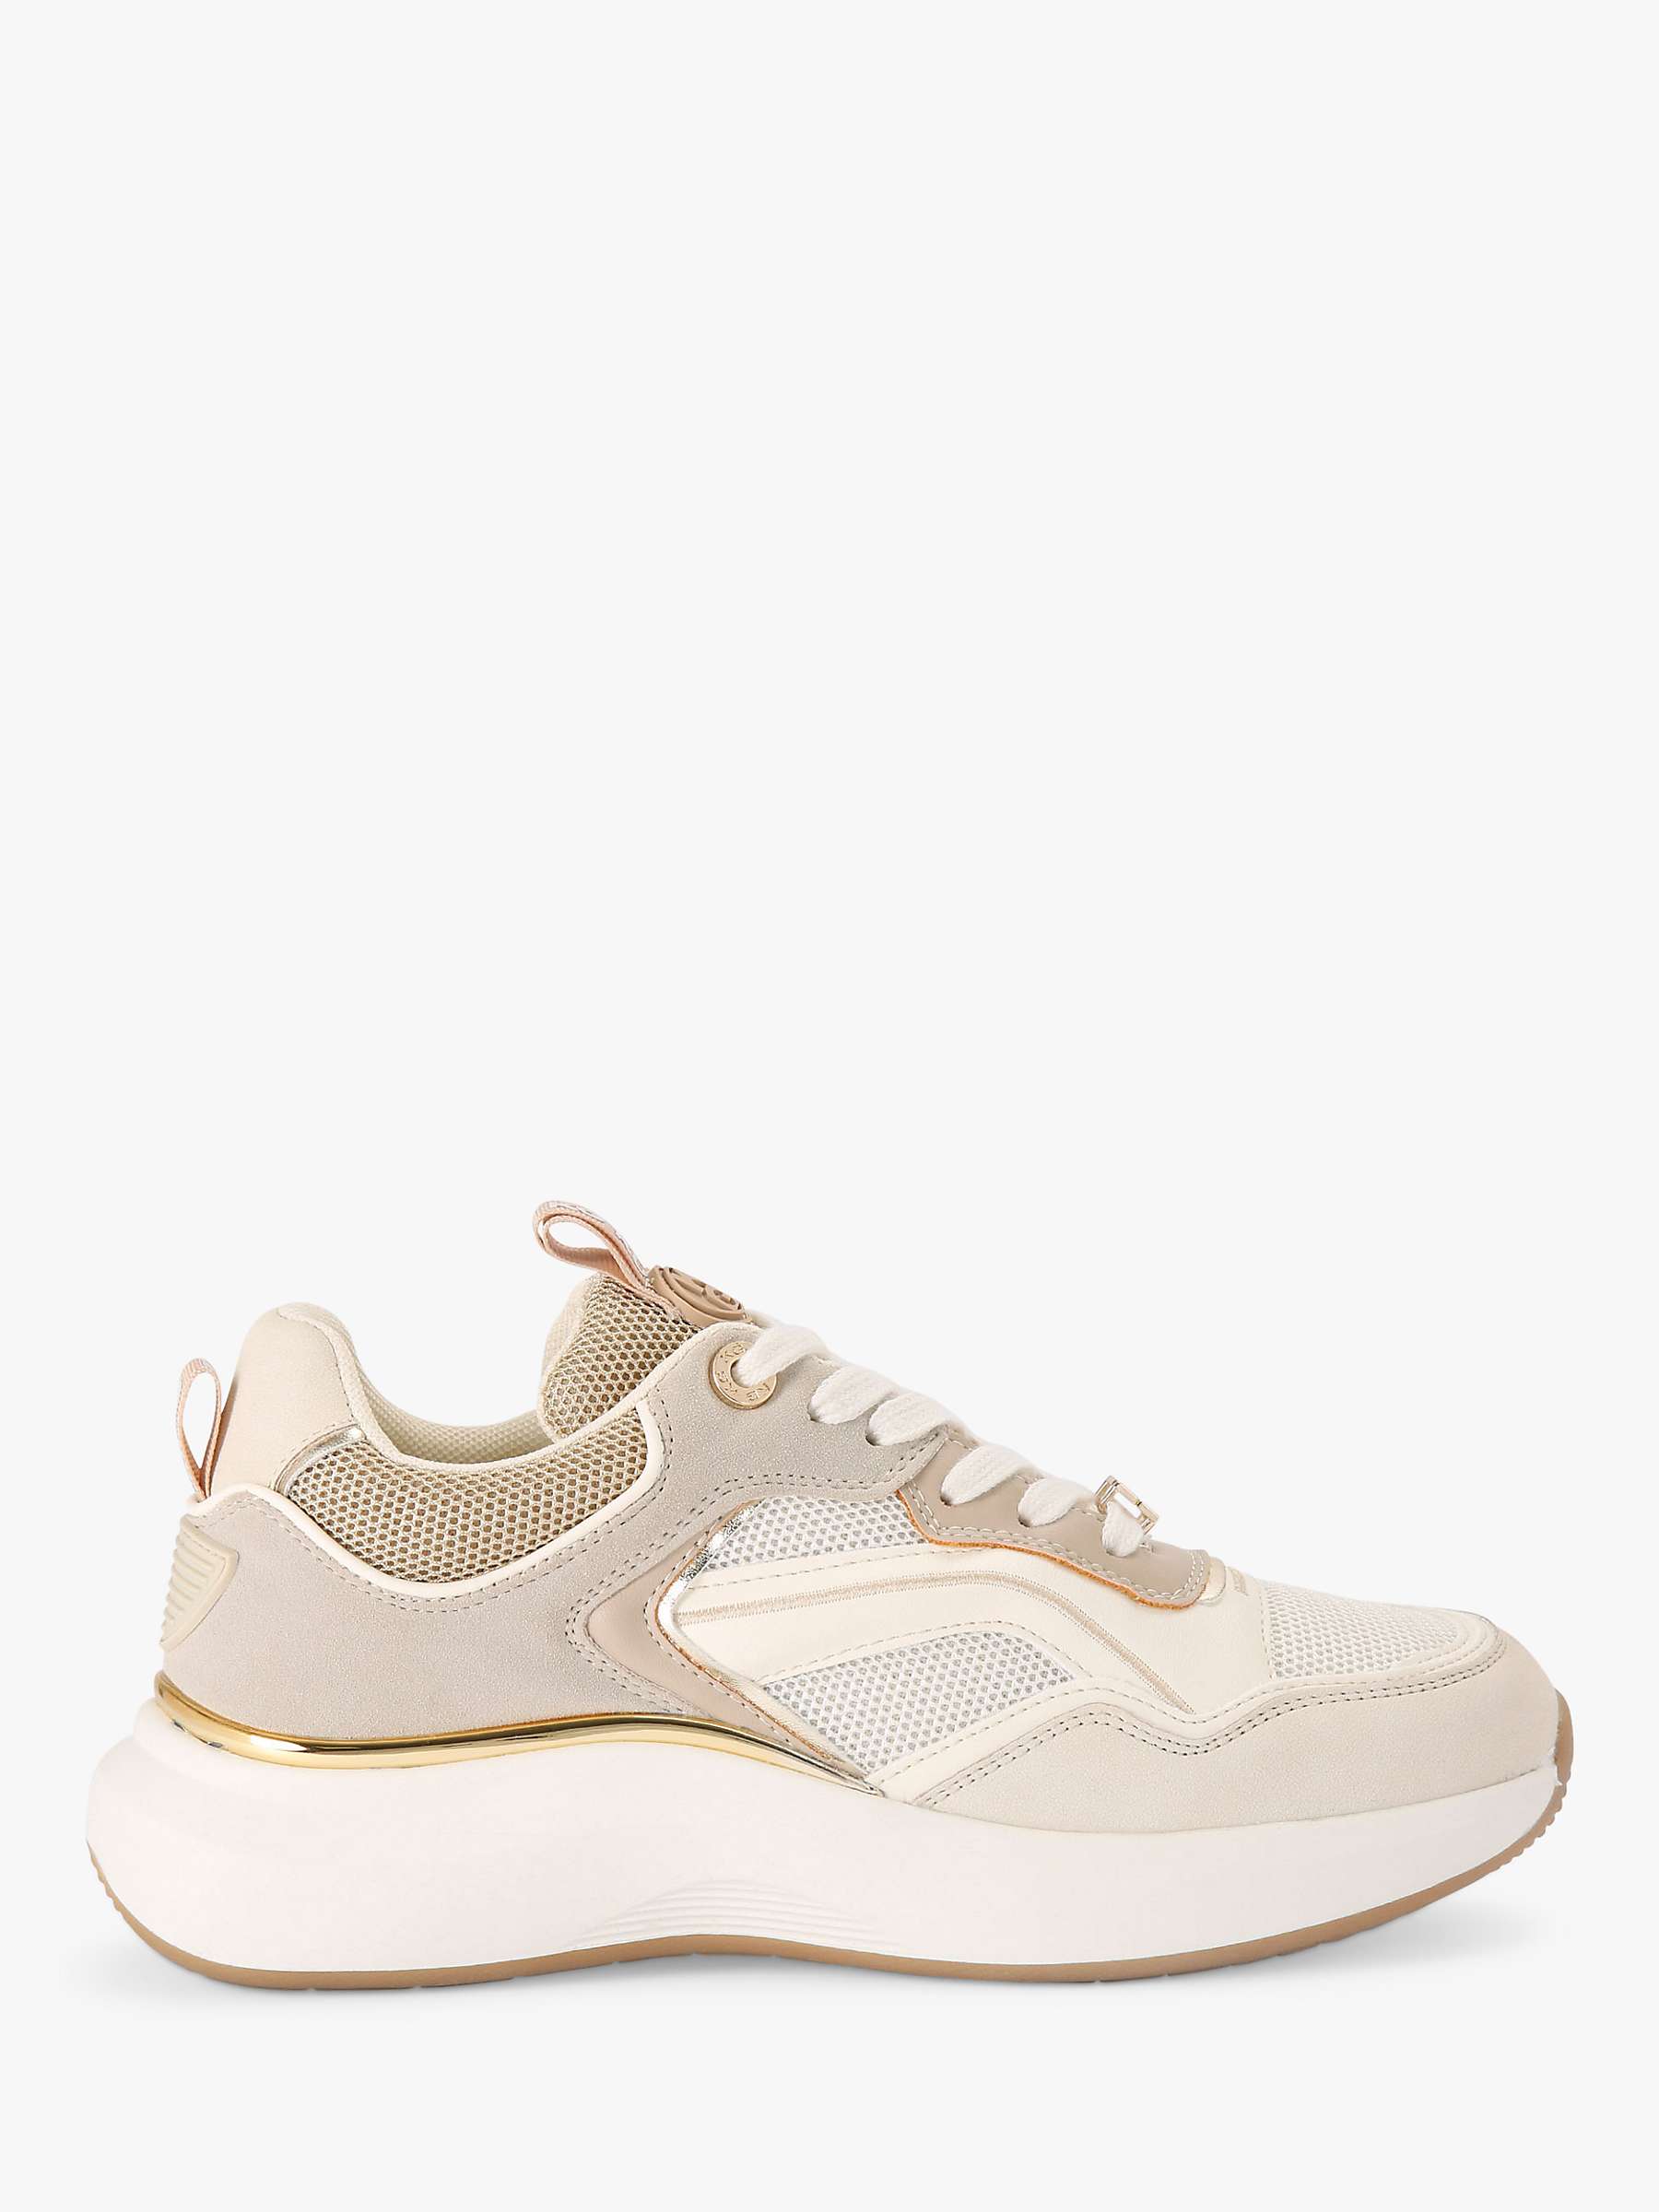 KG Kurt Geiger Leila Canvas Trainers, Natural Taupe at John Lewis ...